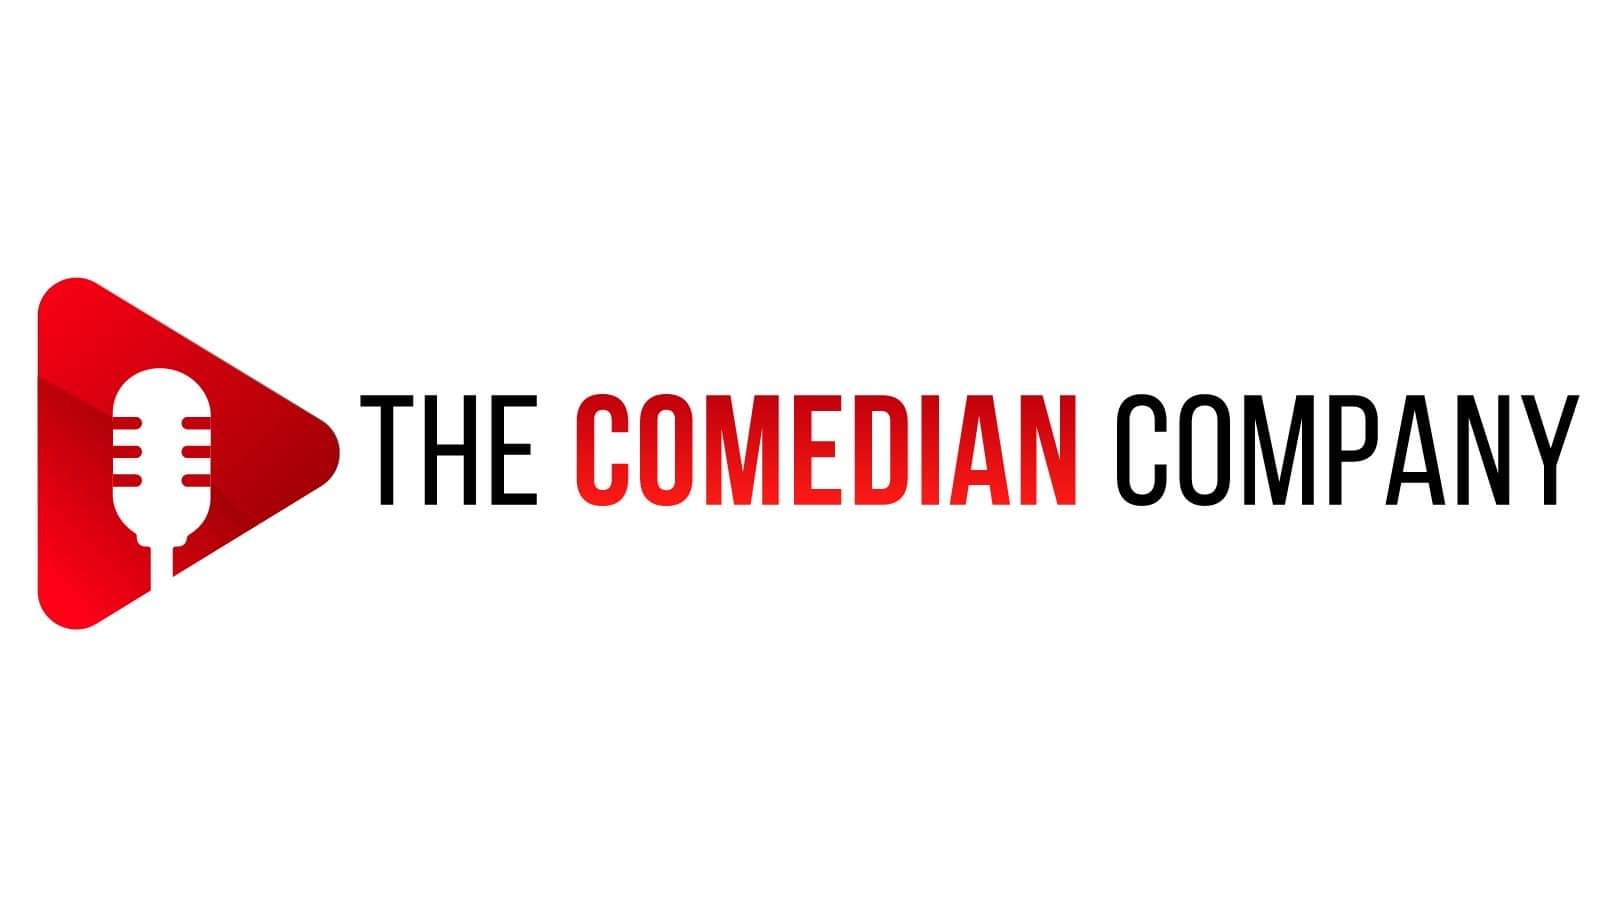 Logo of The Comedian Company, showing a white icon of an old-school mic against a red 'play' triangle background, with black and red letters against a white background: 'The Comedian Company.'